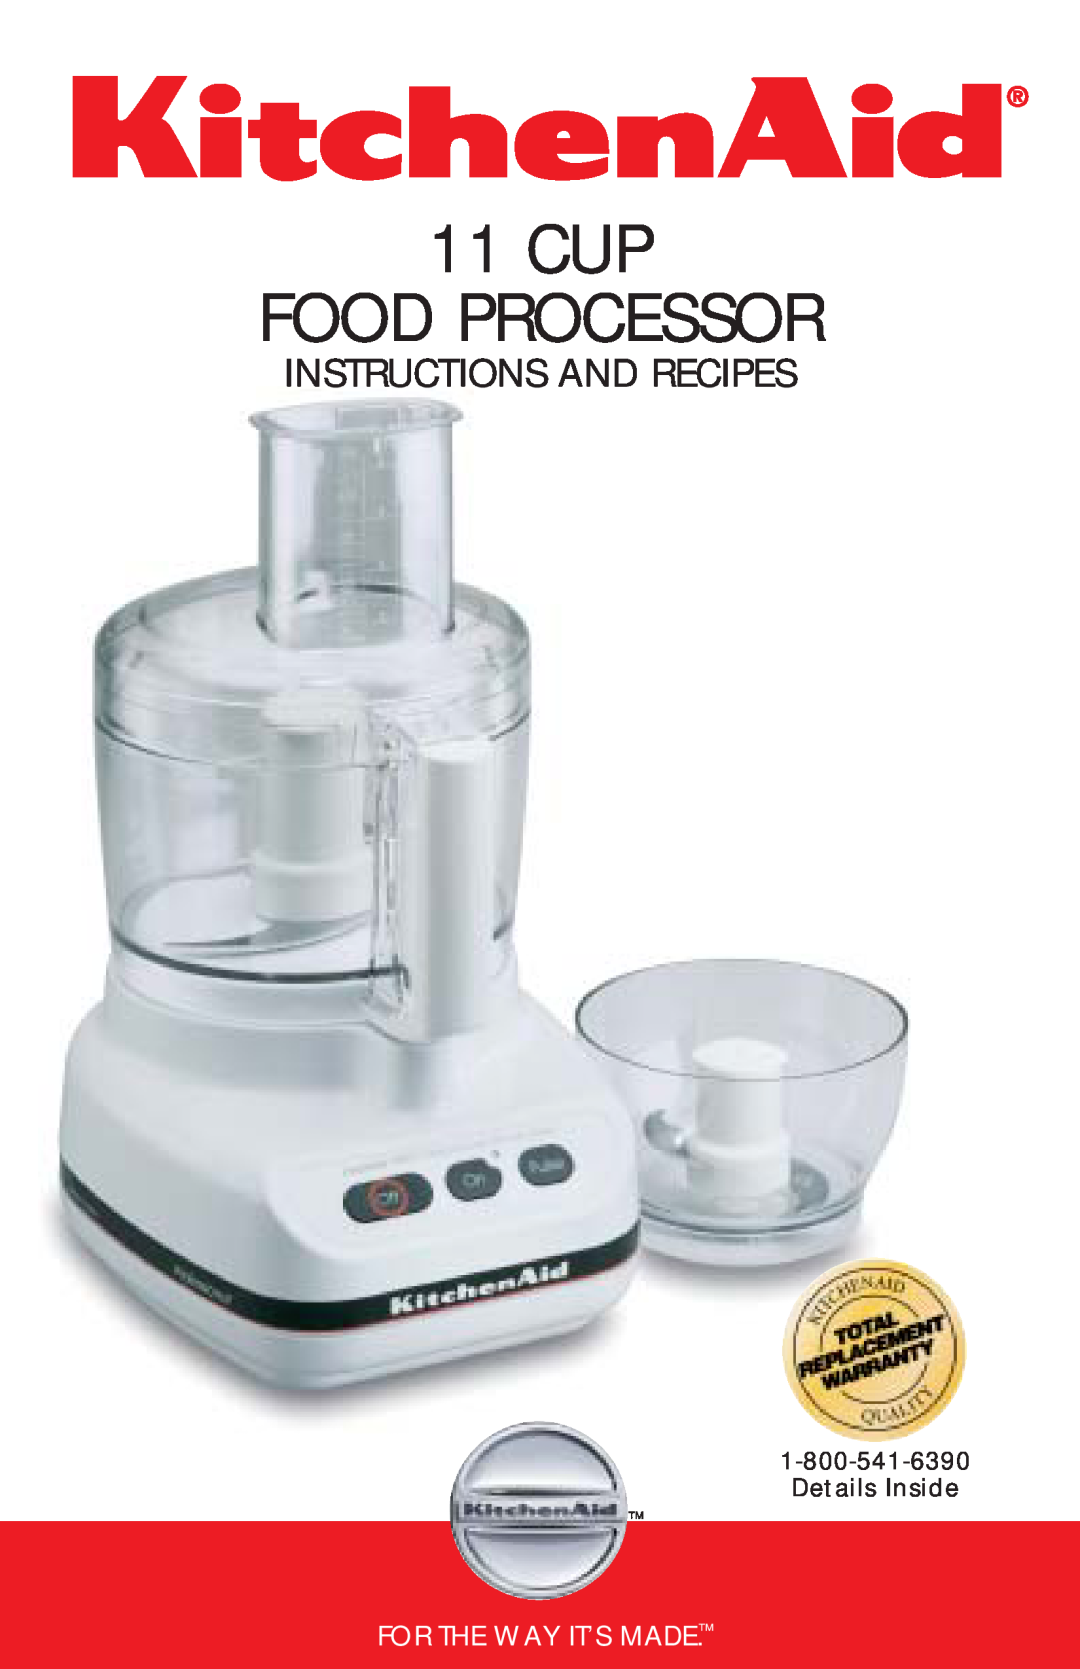 Kenmore KFPSL4, KFPSL6, KFPFF manual Cup Food Processor, Instructions And Recipes, For The Way It’S Made, Details Inside 